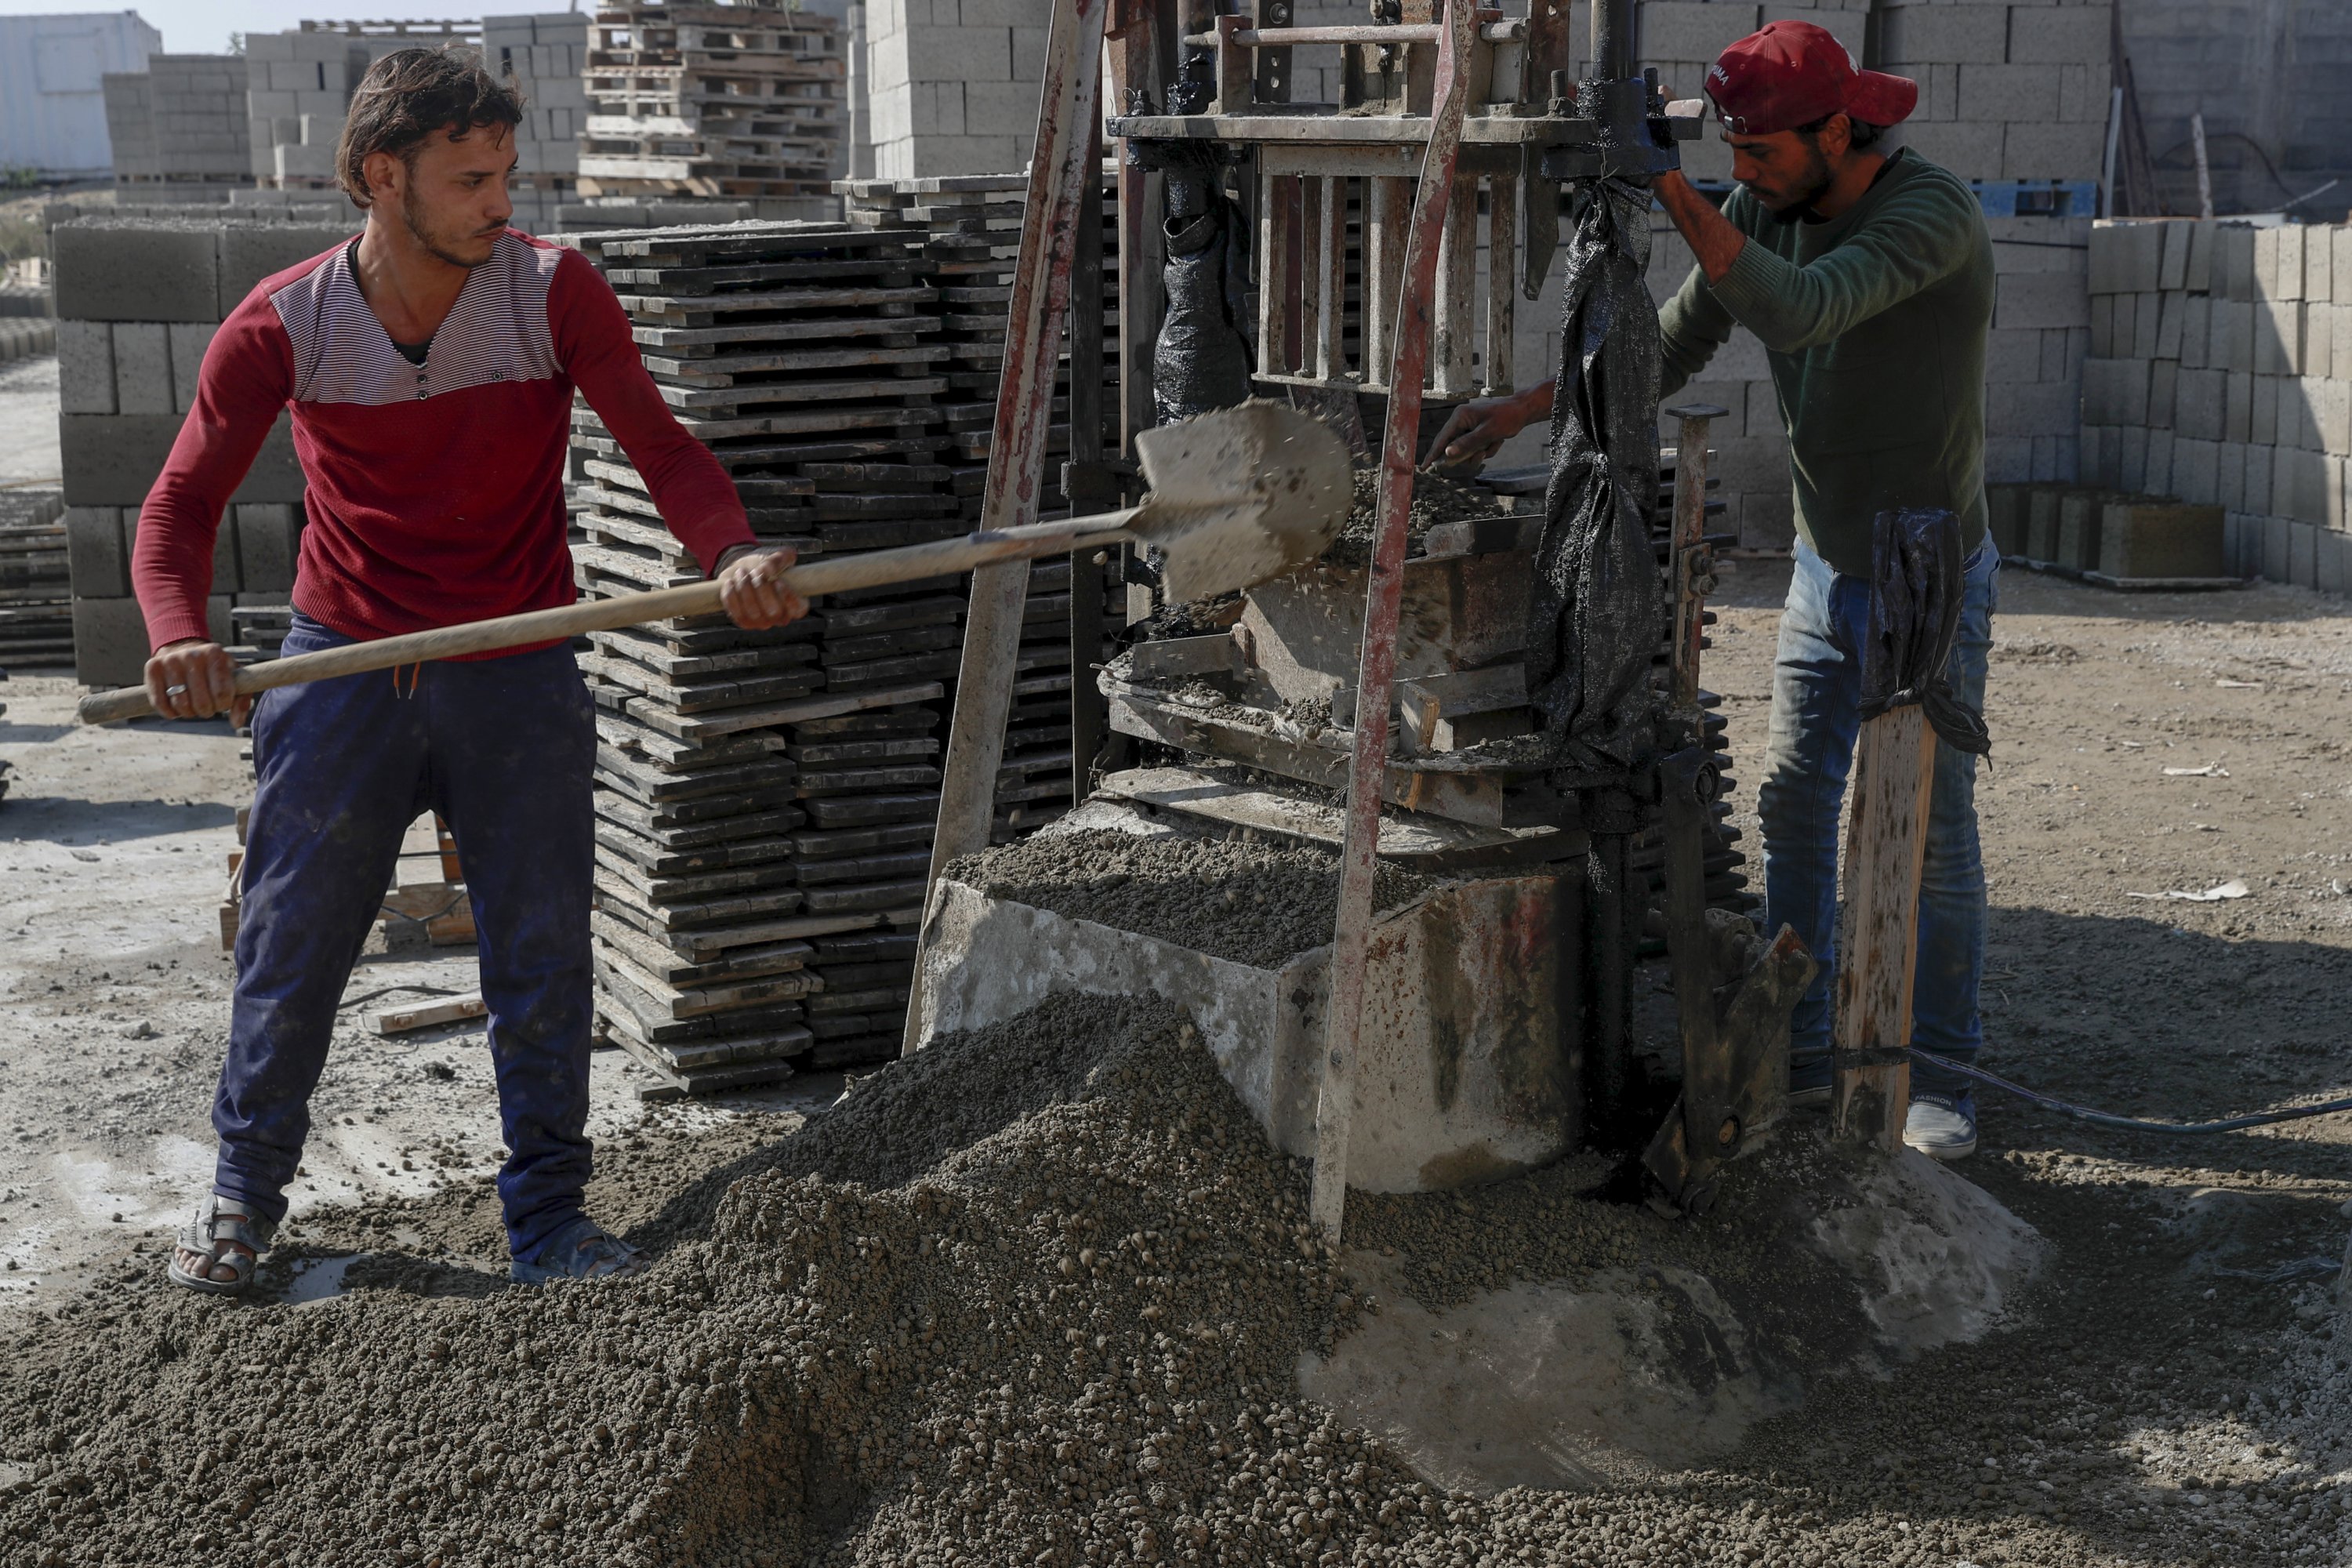 Palestinian workers make concrete bricks from recycled rubble of  buildings to be used in reconstruction of buildings that were damaged by Israeli airstrikes during Israel's war with Gaza's Hamas rulers last May, at a brick factory east of Gaza City, Jan. 6, 2022. (AP Photo)